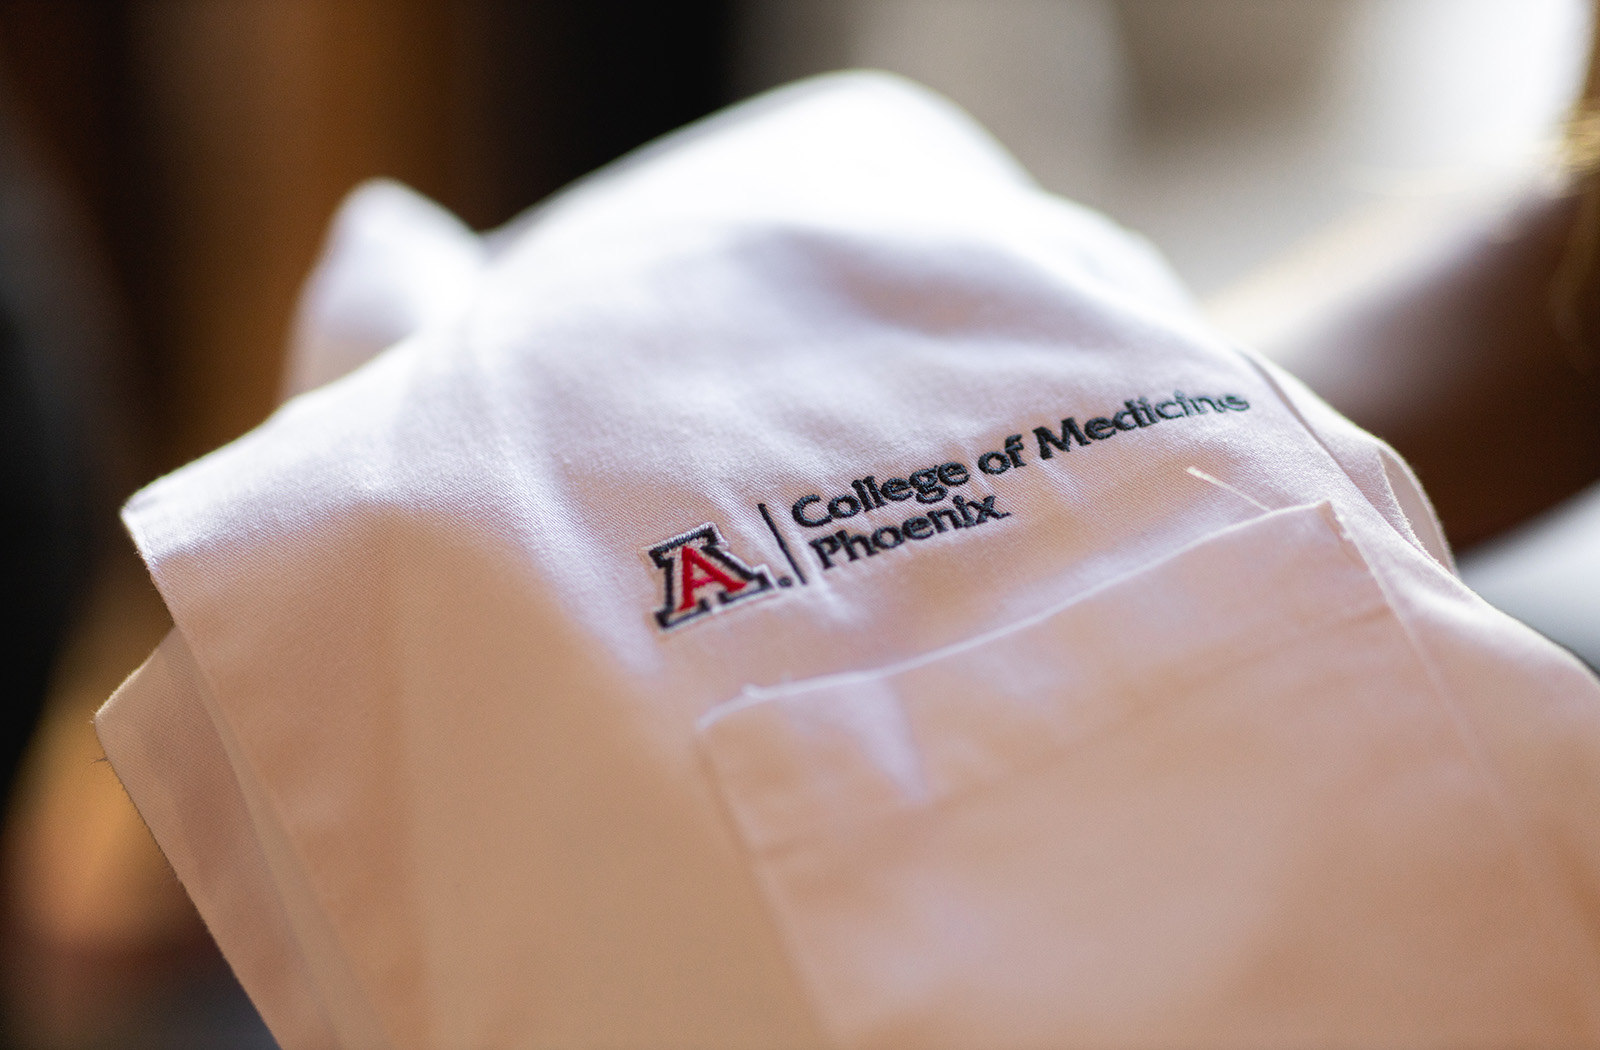 A white coat with the college's logo on it